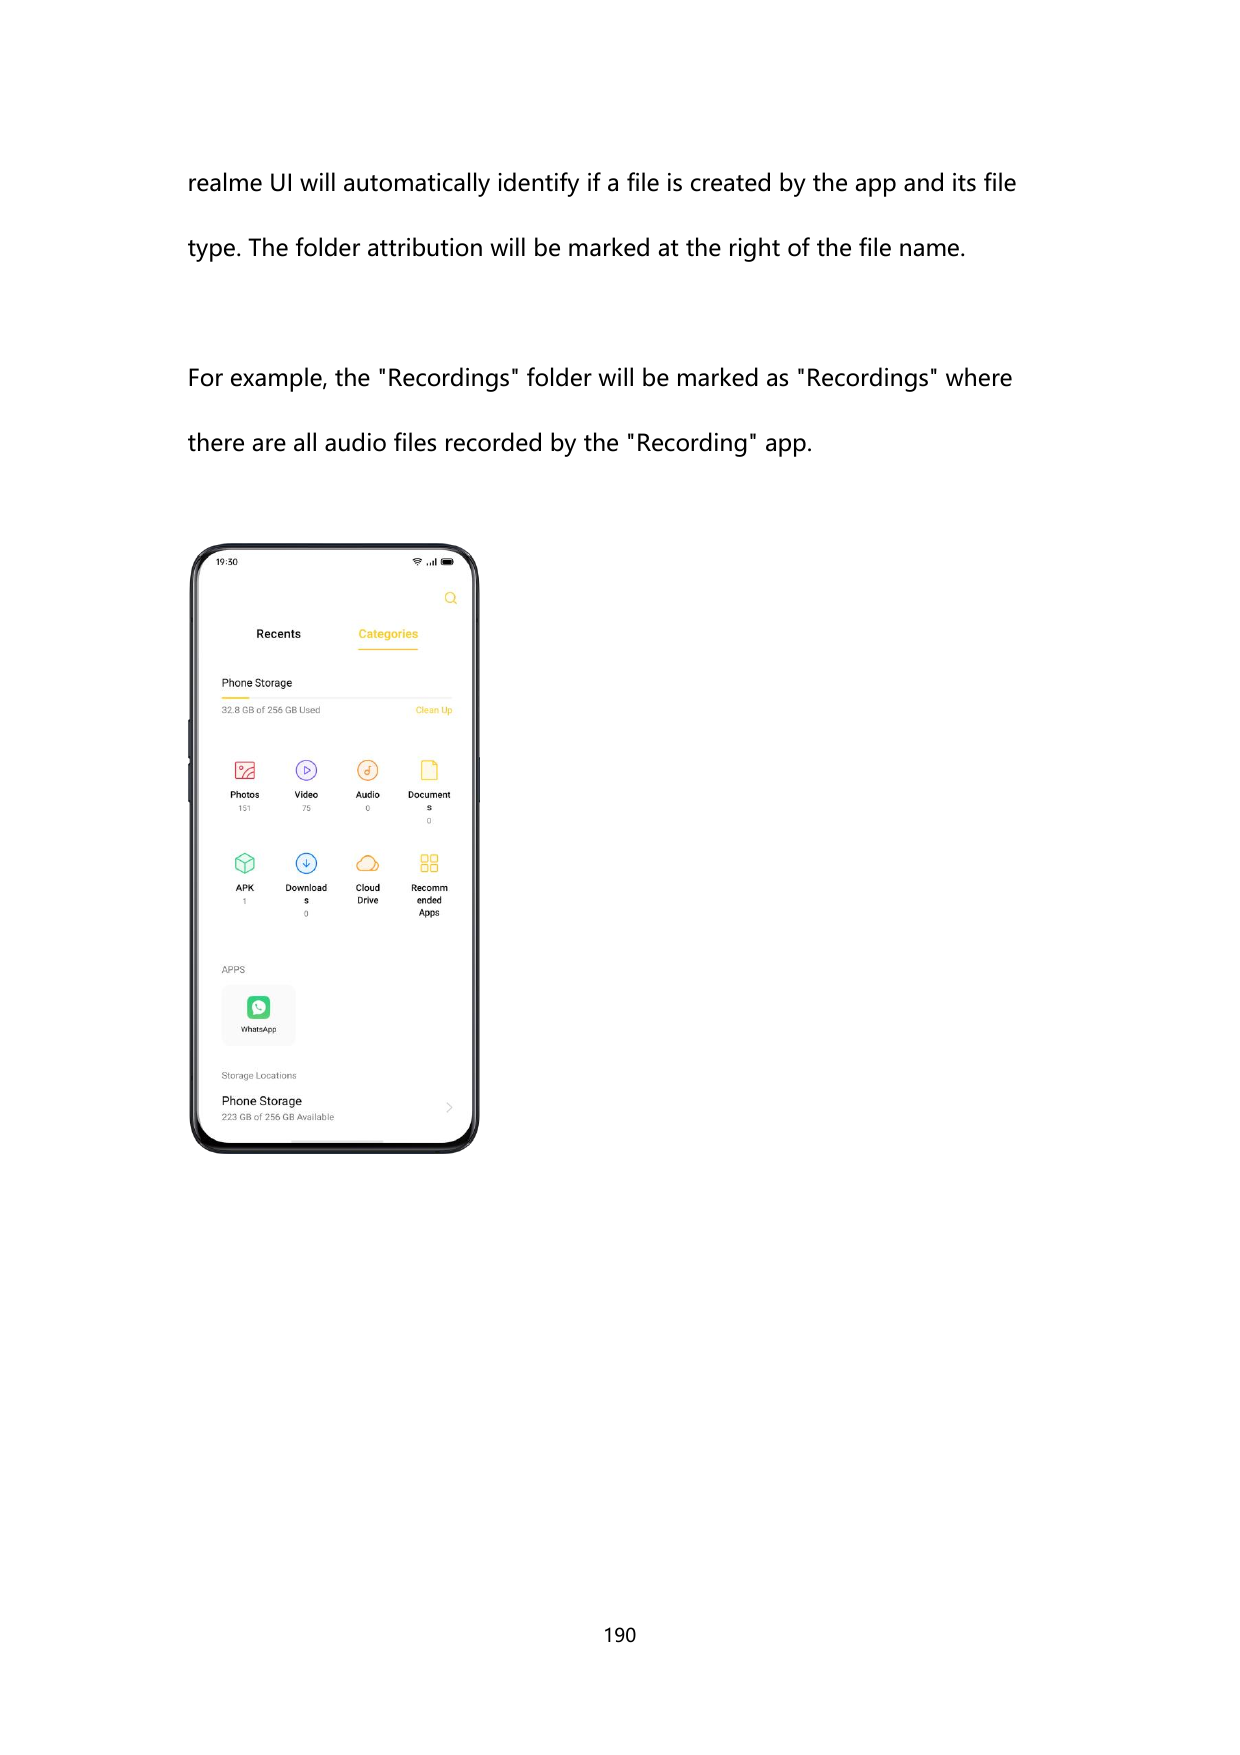 realme UI will automatically identify if a file is created by the app and its filetype. The folder attribution will be marked at